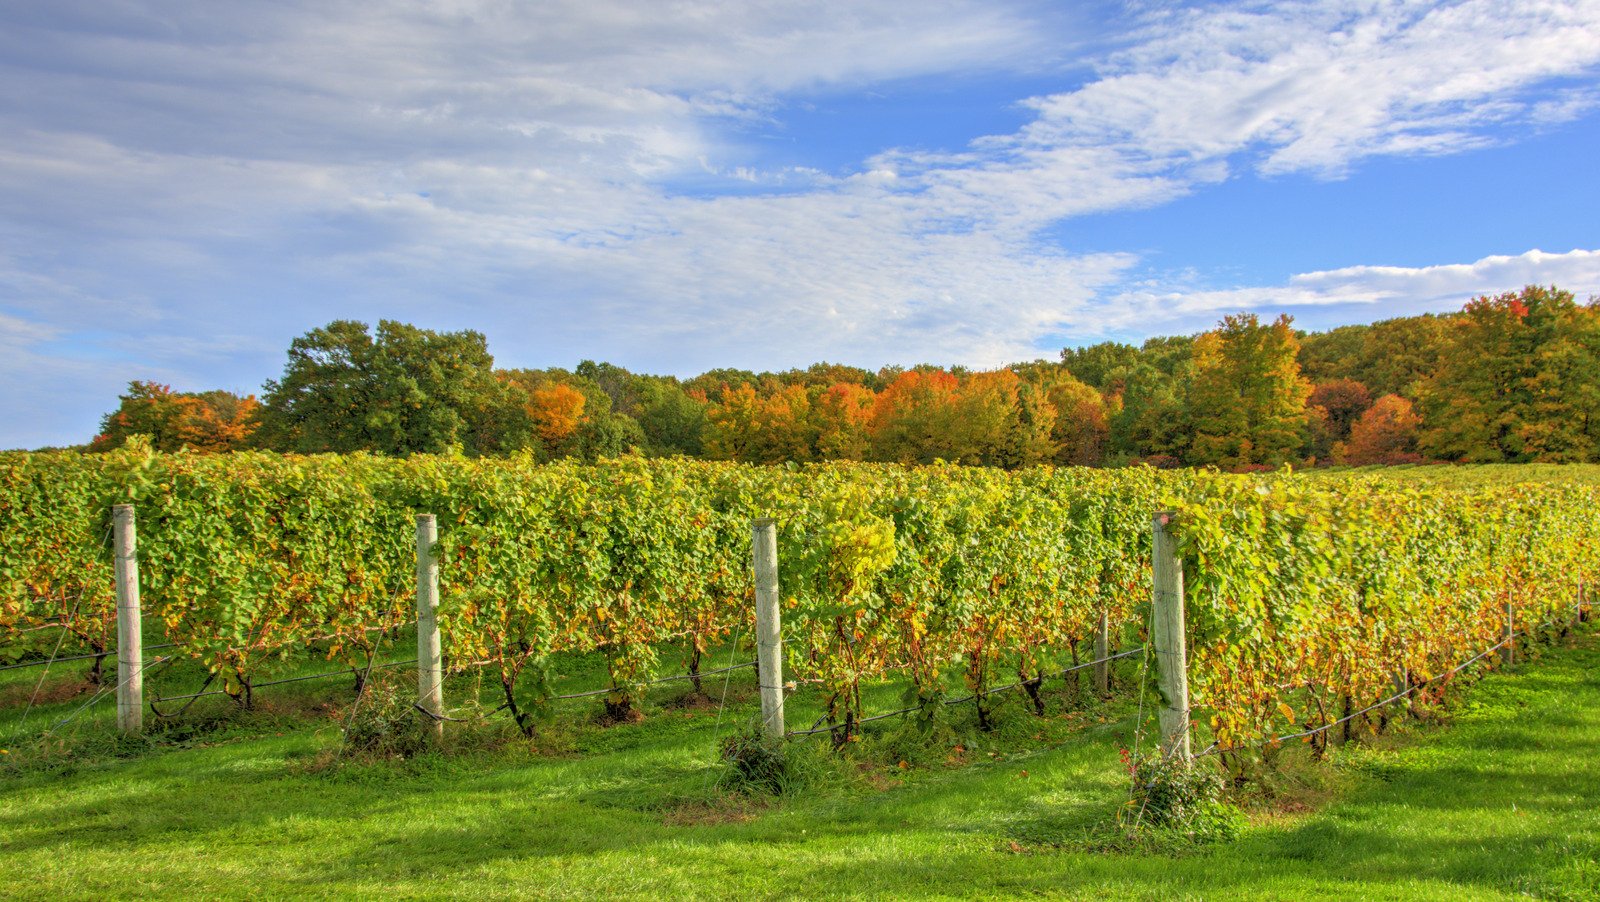 This Midwest Town Is One Of The Best Wine Destinations In The U.S 